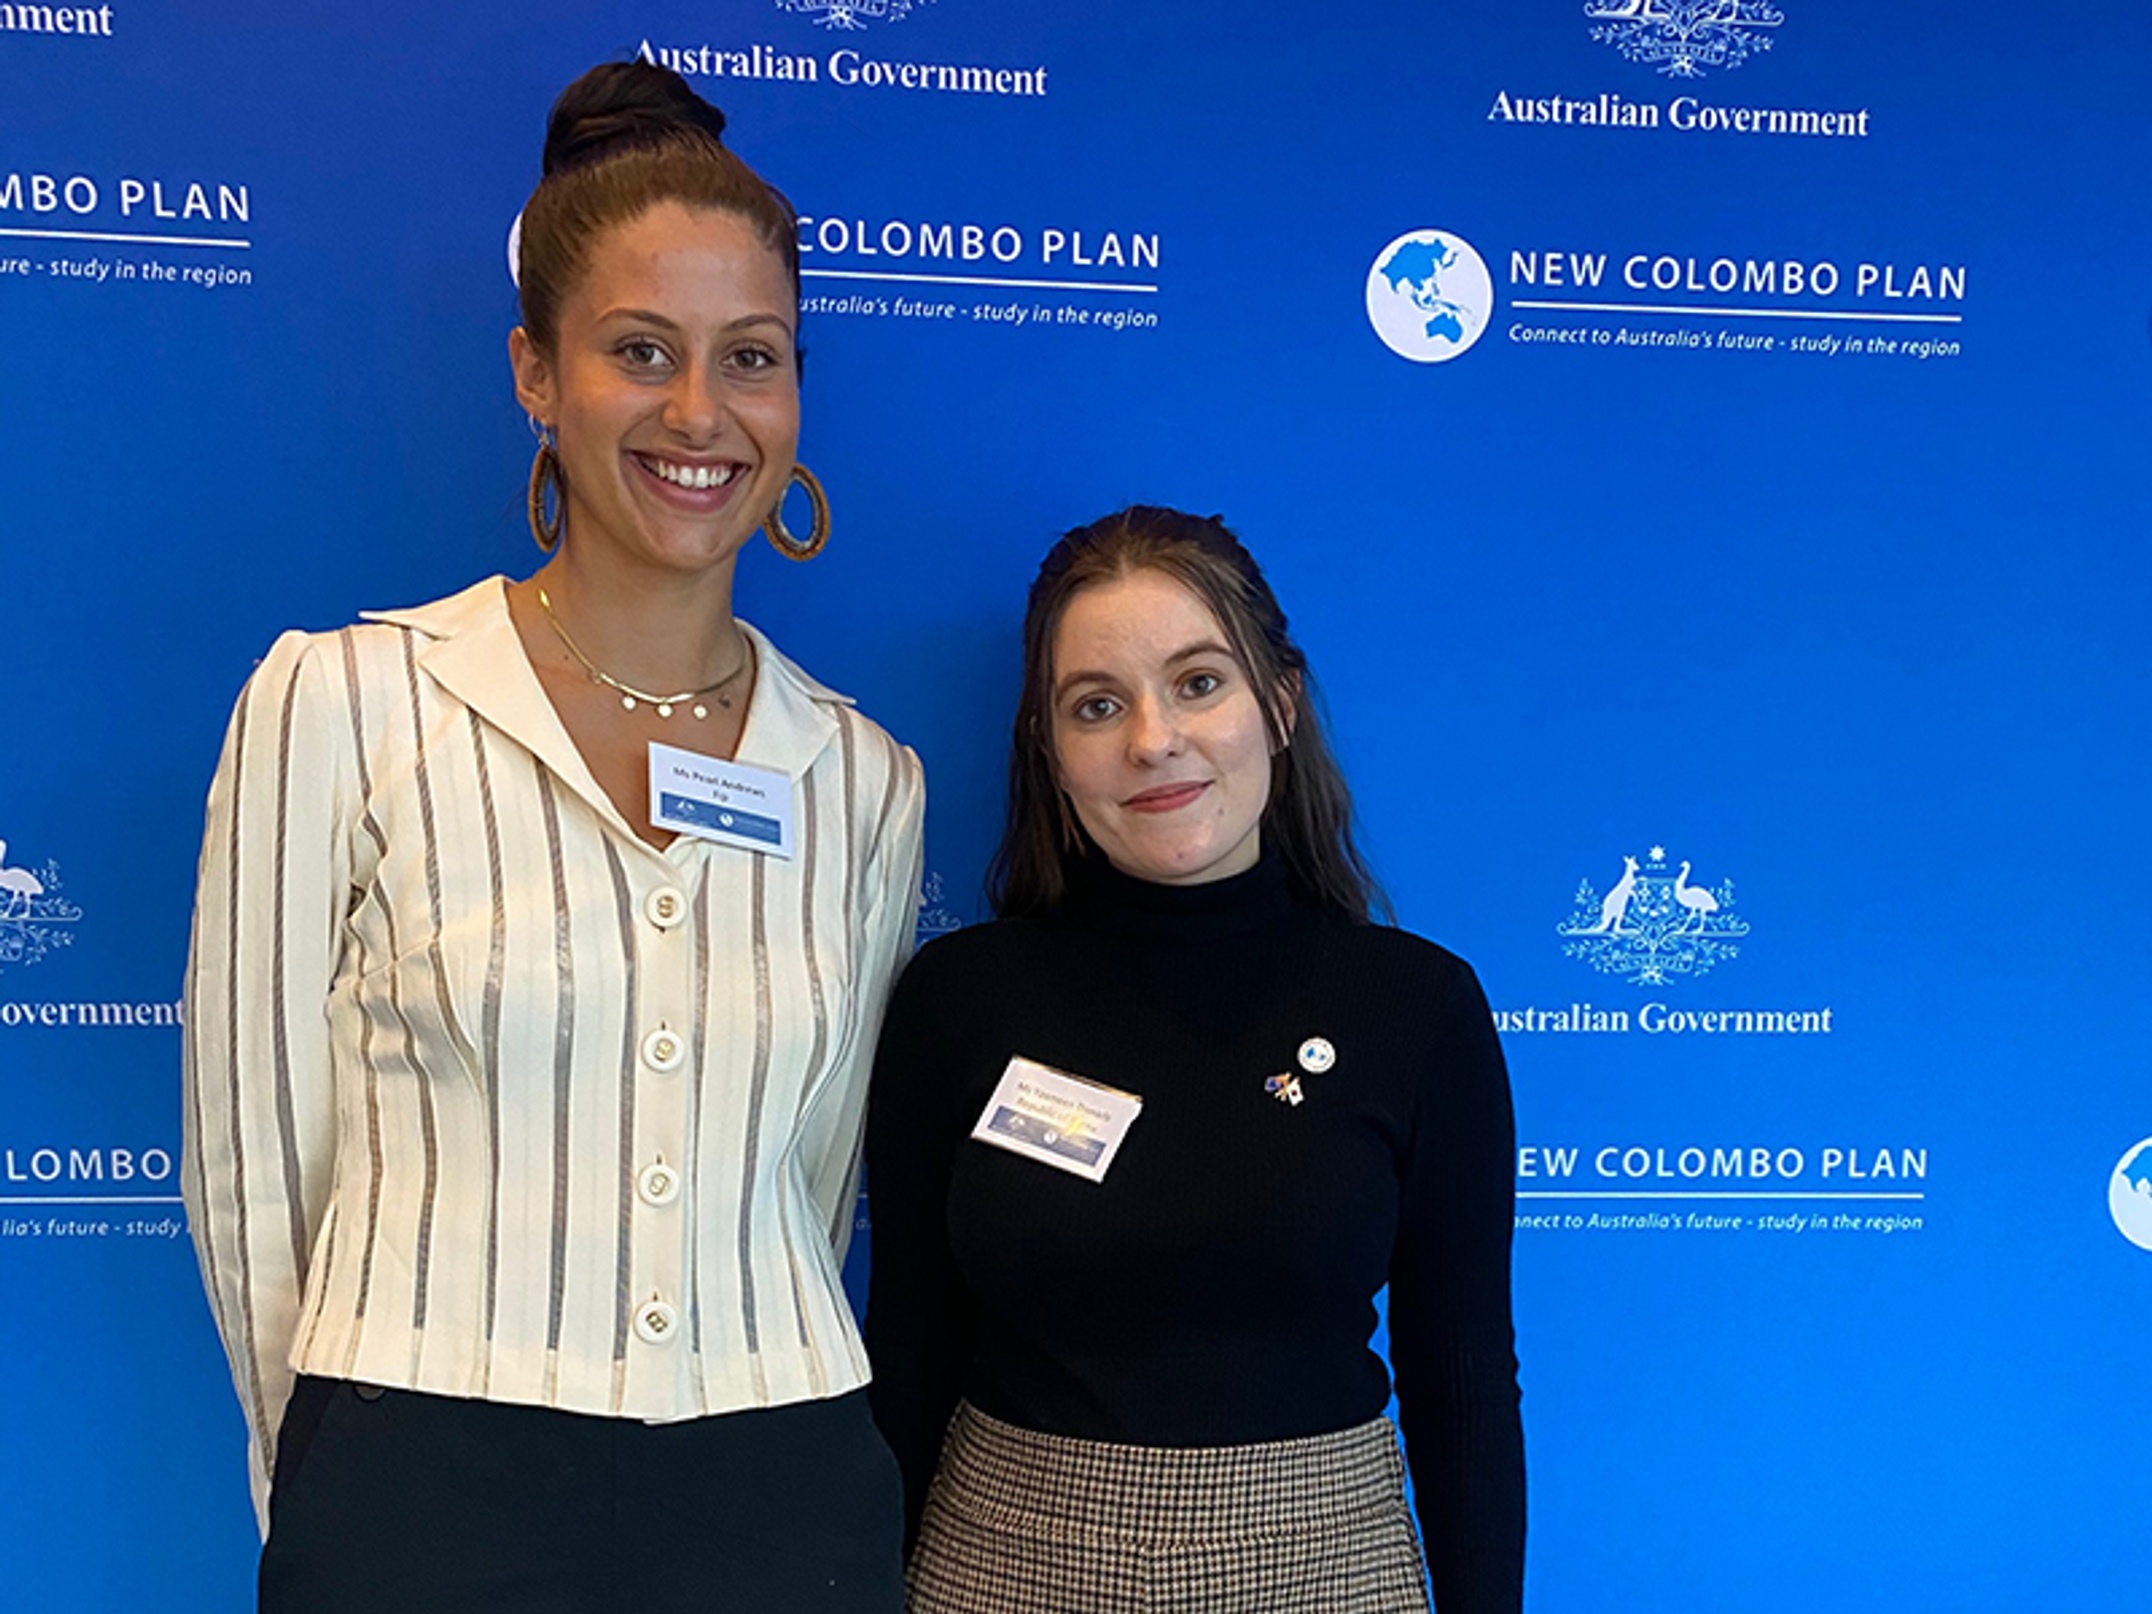 Southern Cross undergraduates Pearl Andrews and Yasmeen Daniels at the NCP Awards Ceremony in Canberra